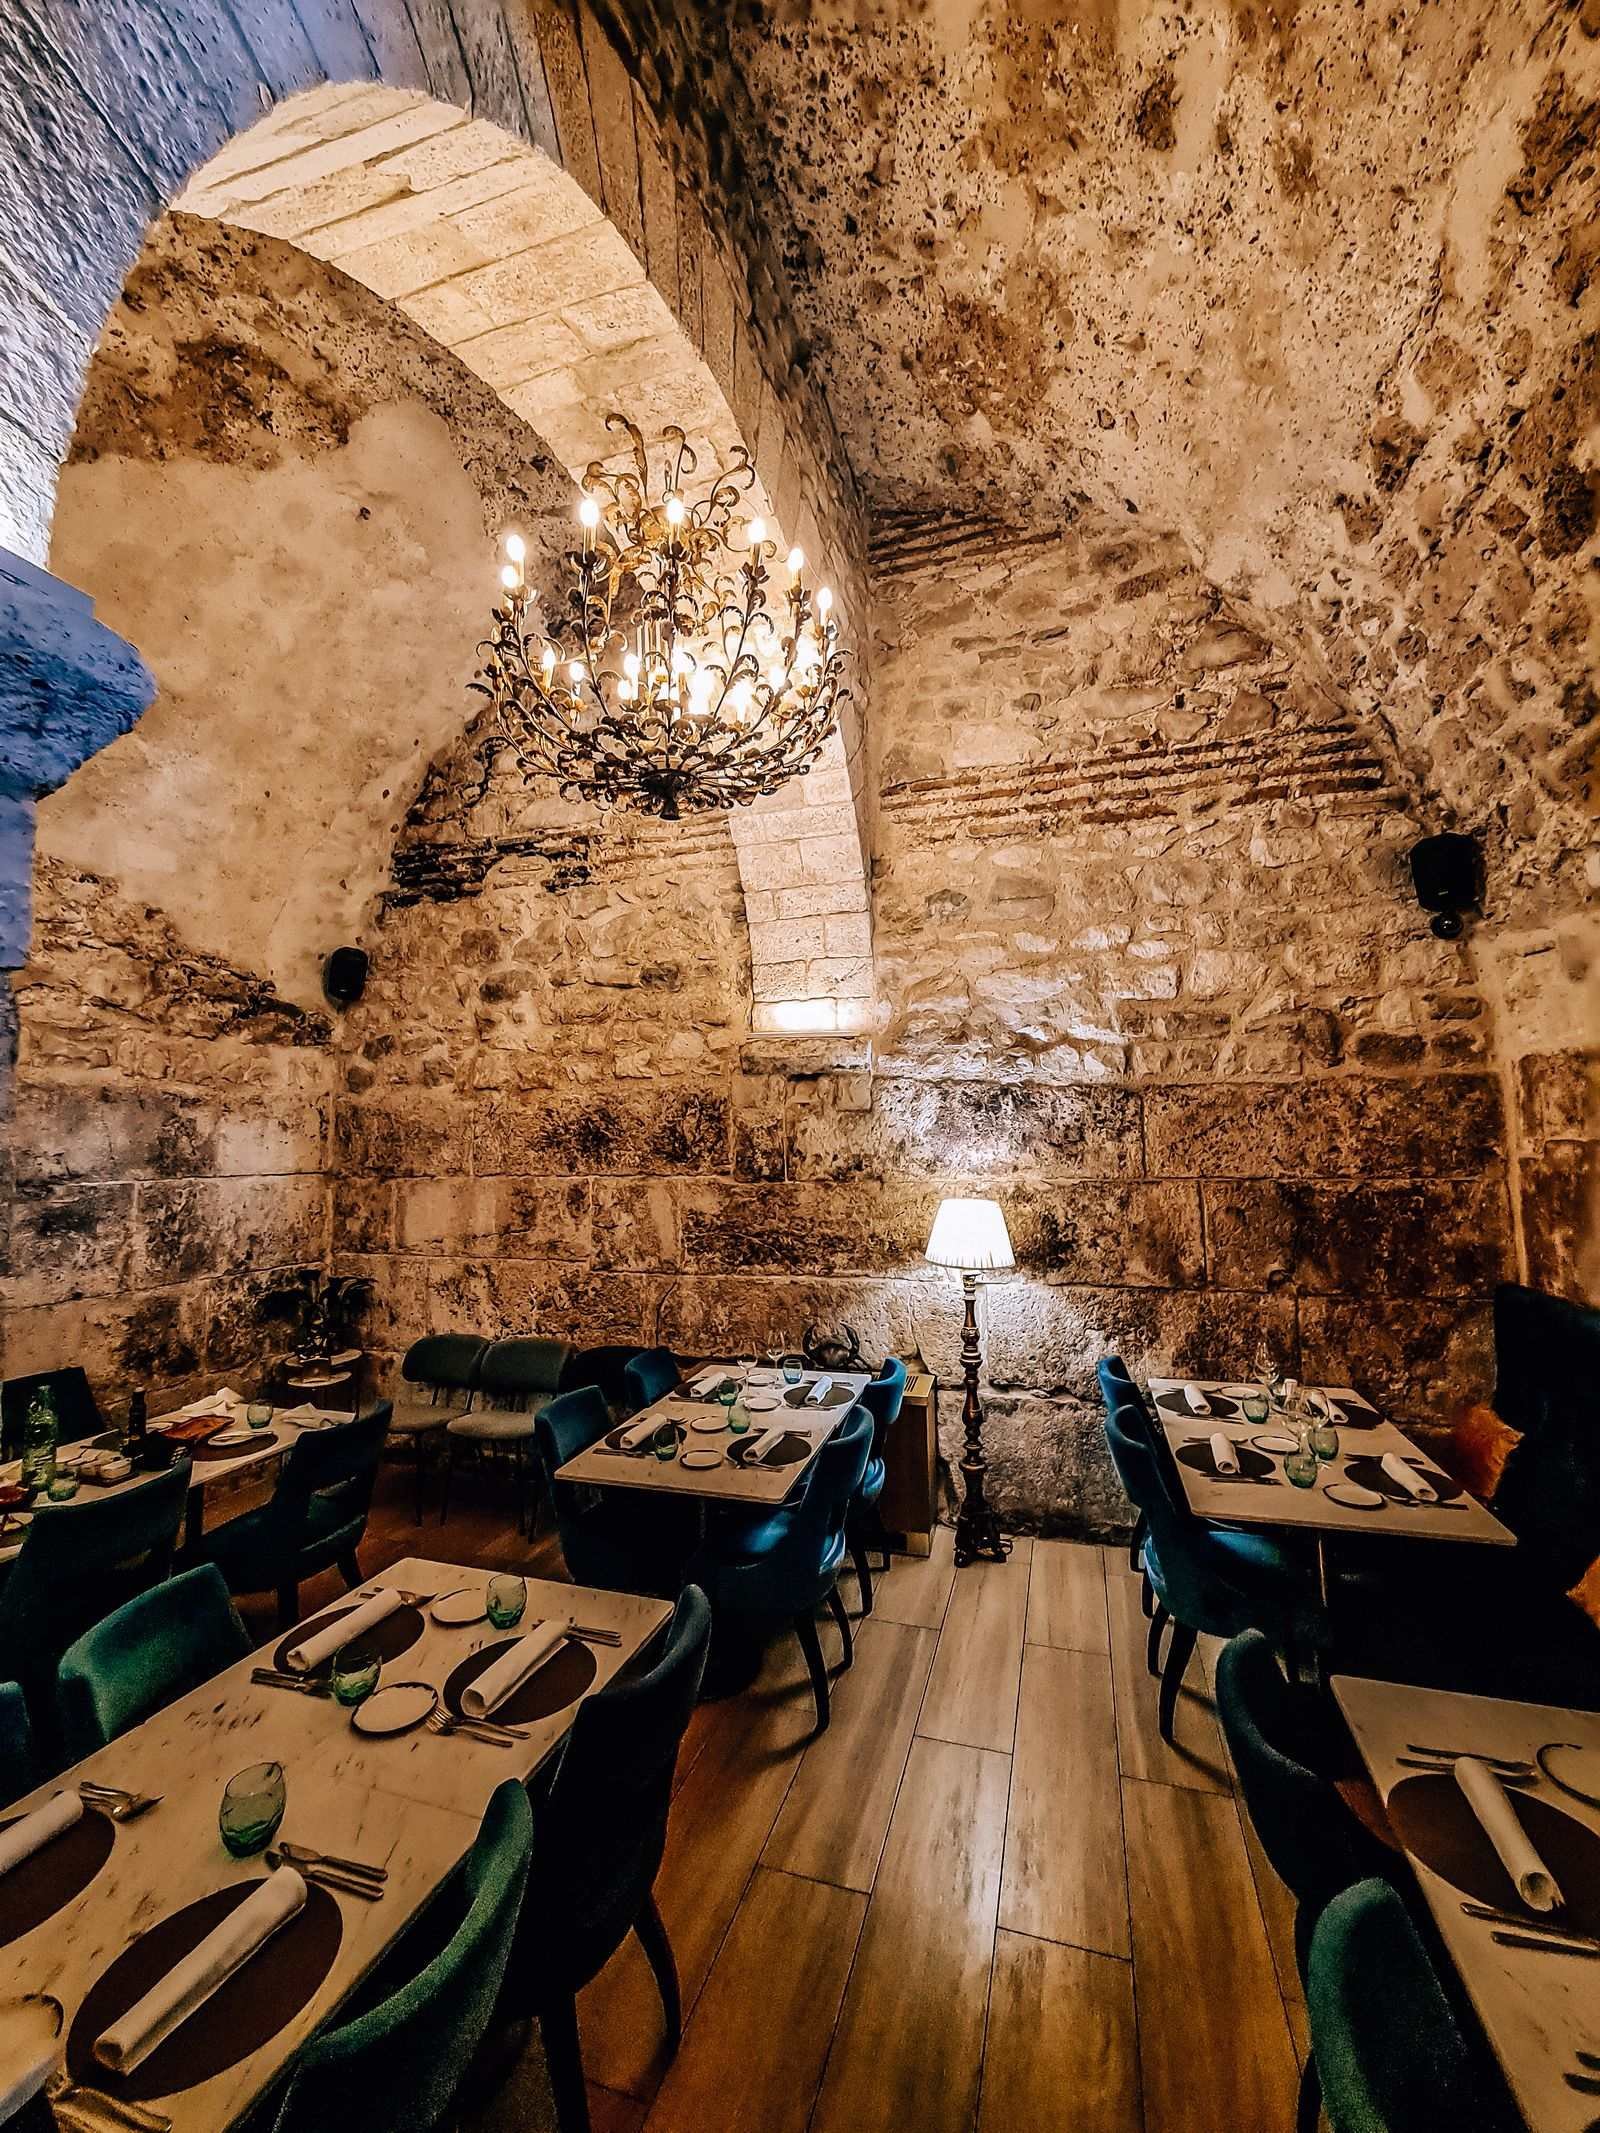 The the old arched stone walls and ceiling of a restaurant with many tables and a chandeliarlier hanging in the centre